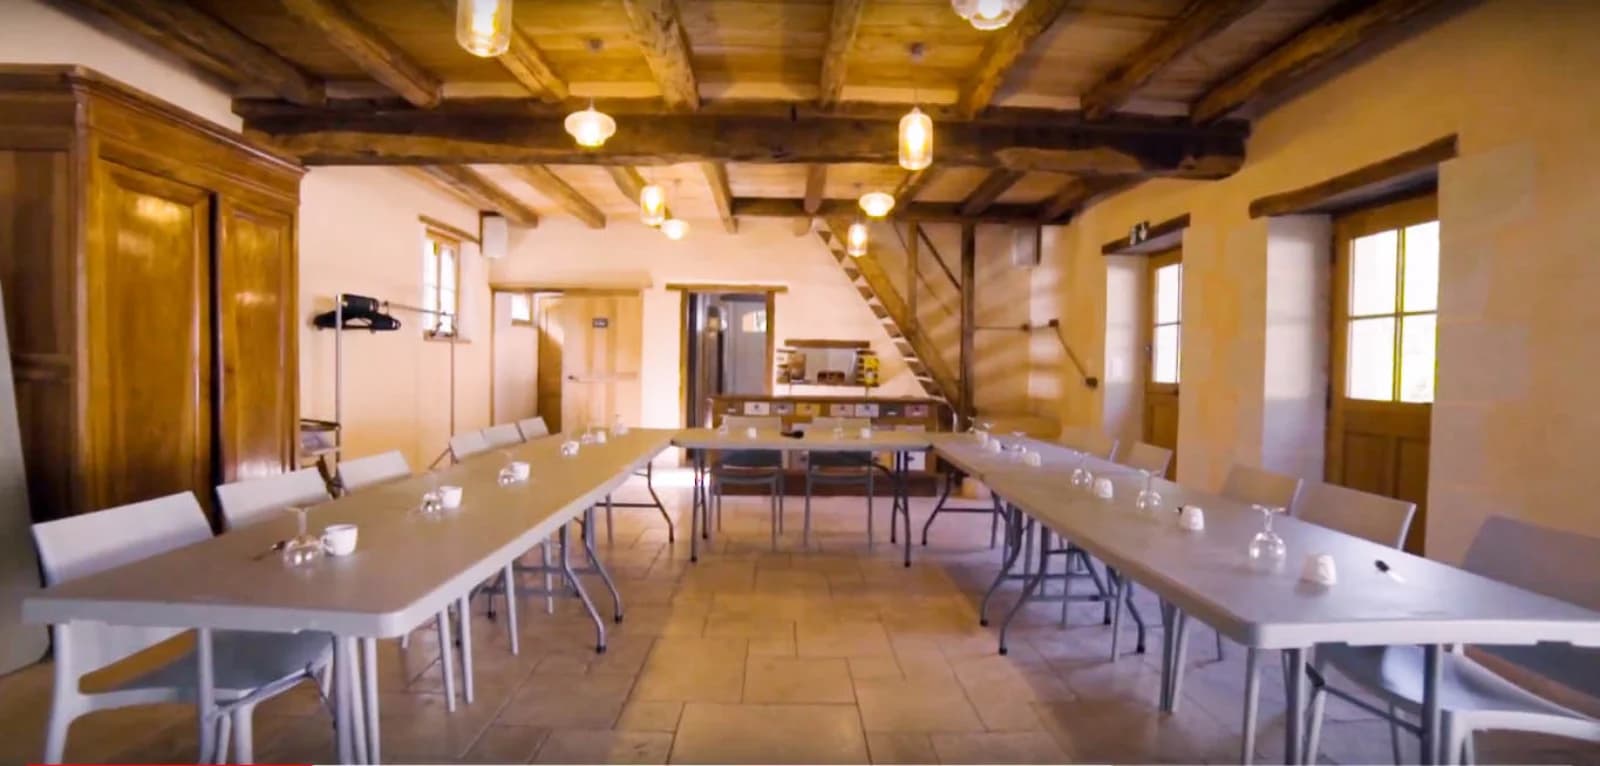 Meeting room in An authentic mill in the heart of nature - 1